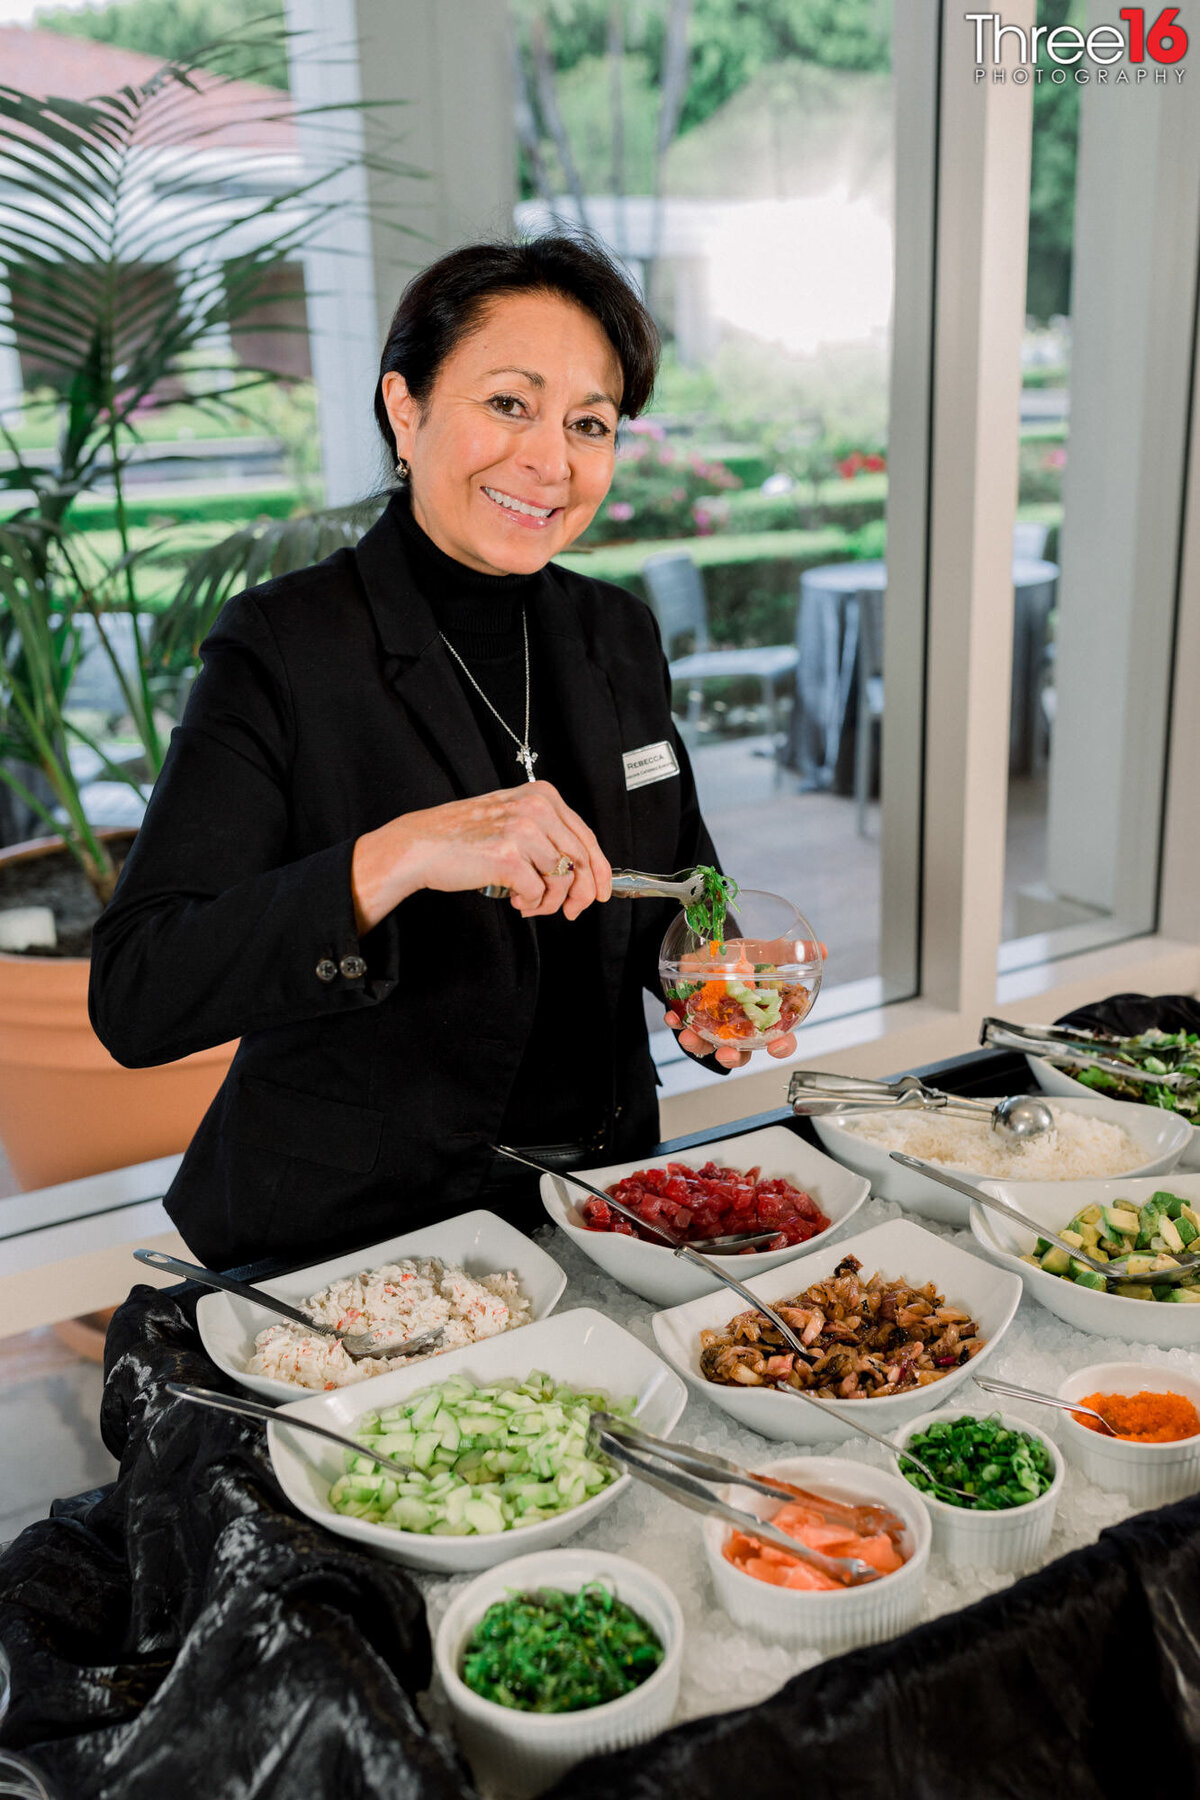 Caterer smiles as she puts a dish of food together